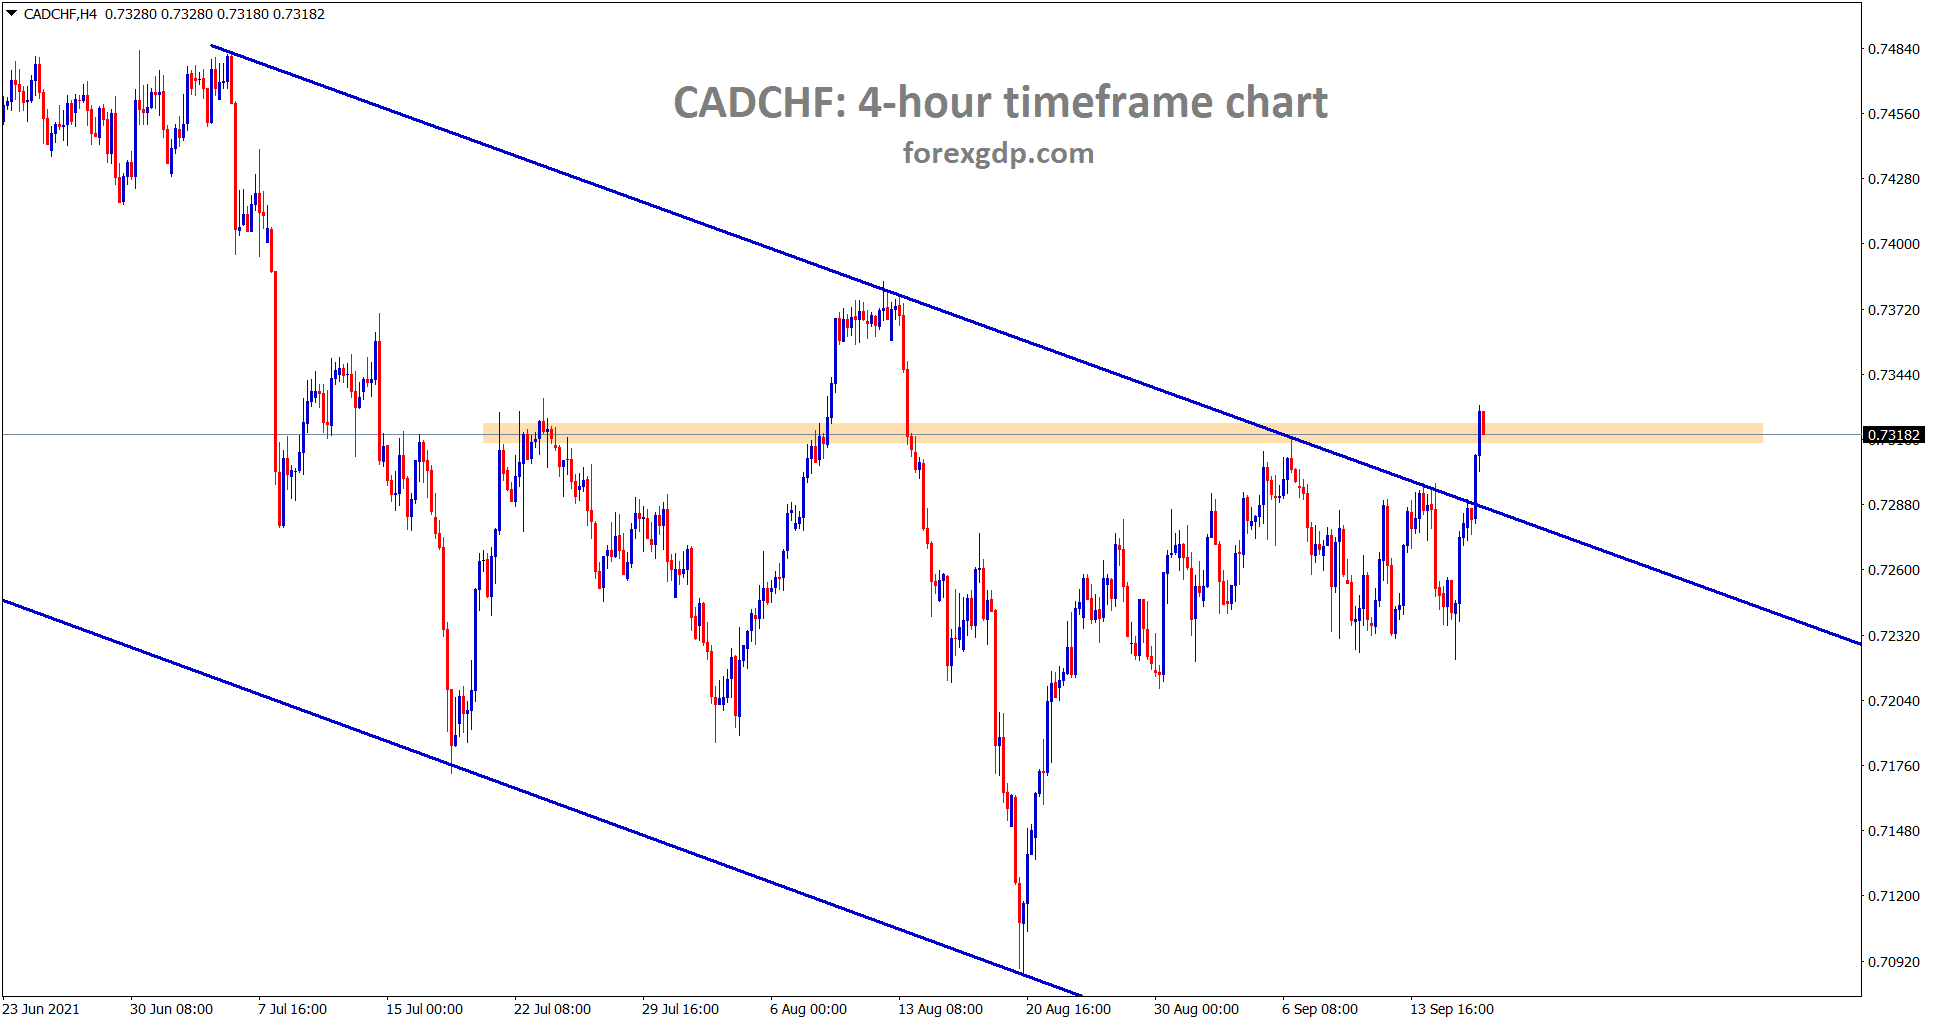 CADCHF is trying to break the lower high area of the downtrend